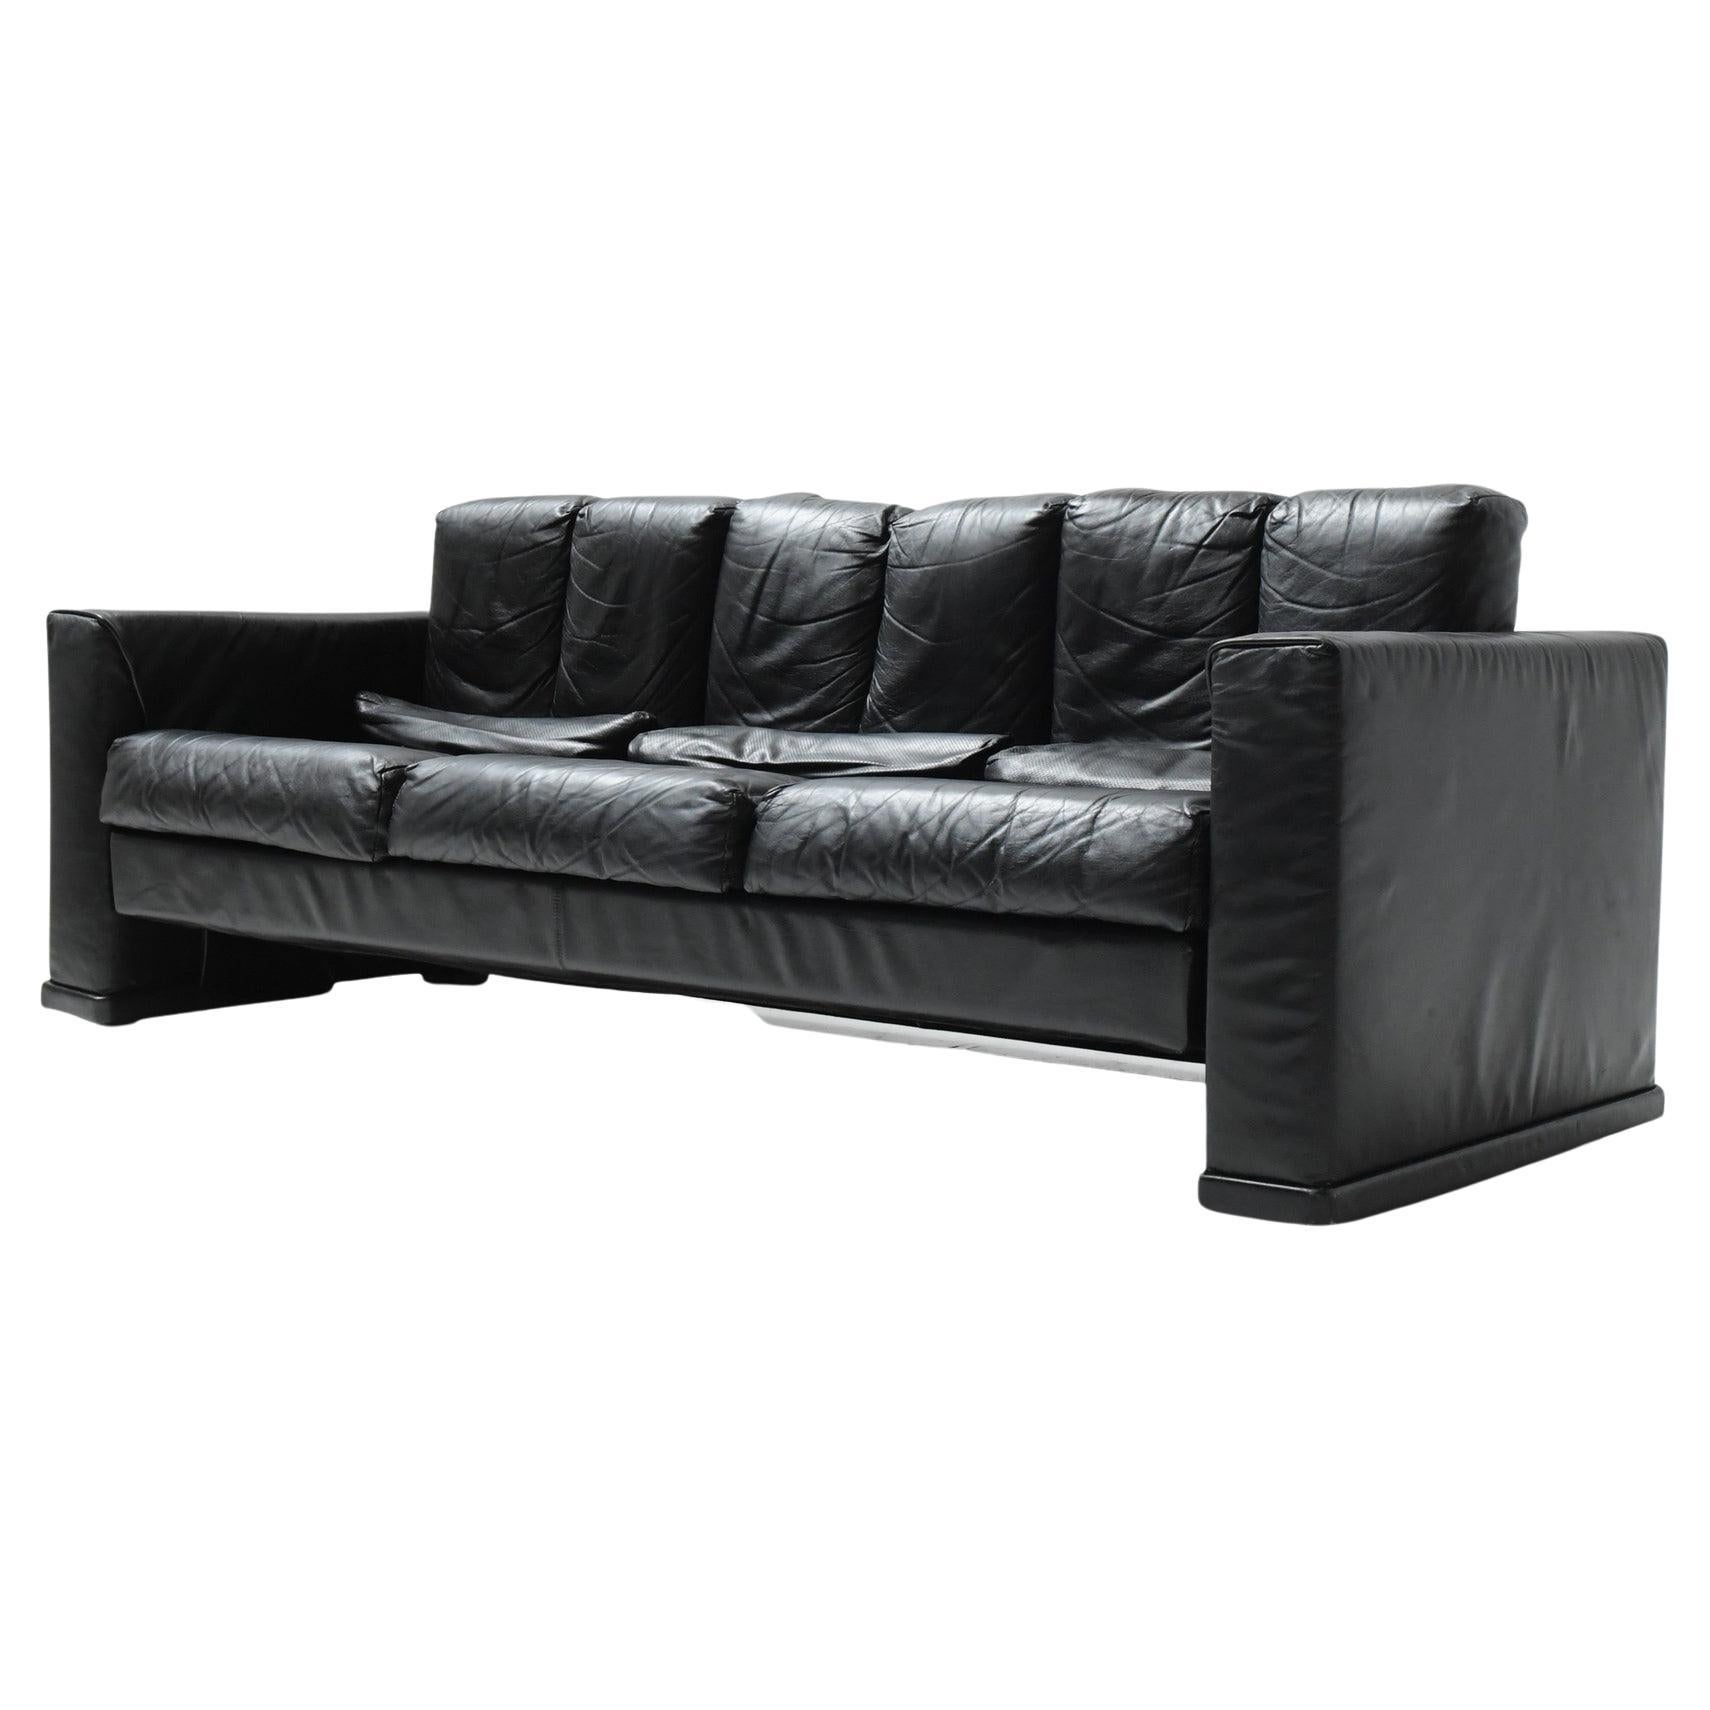 Stunning Excelsior sofa in black leather by Mario Bellini for B&B Italy, 1985.  For Sale